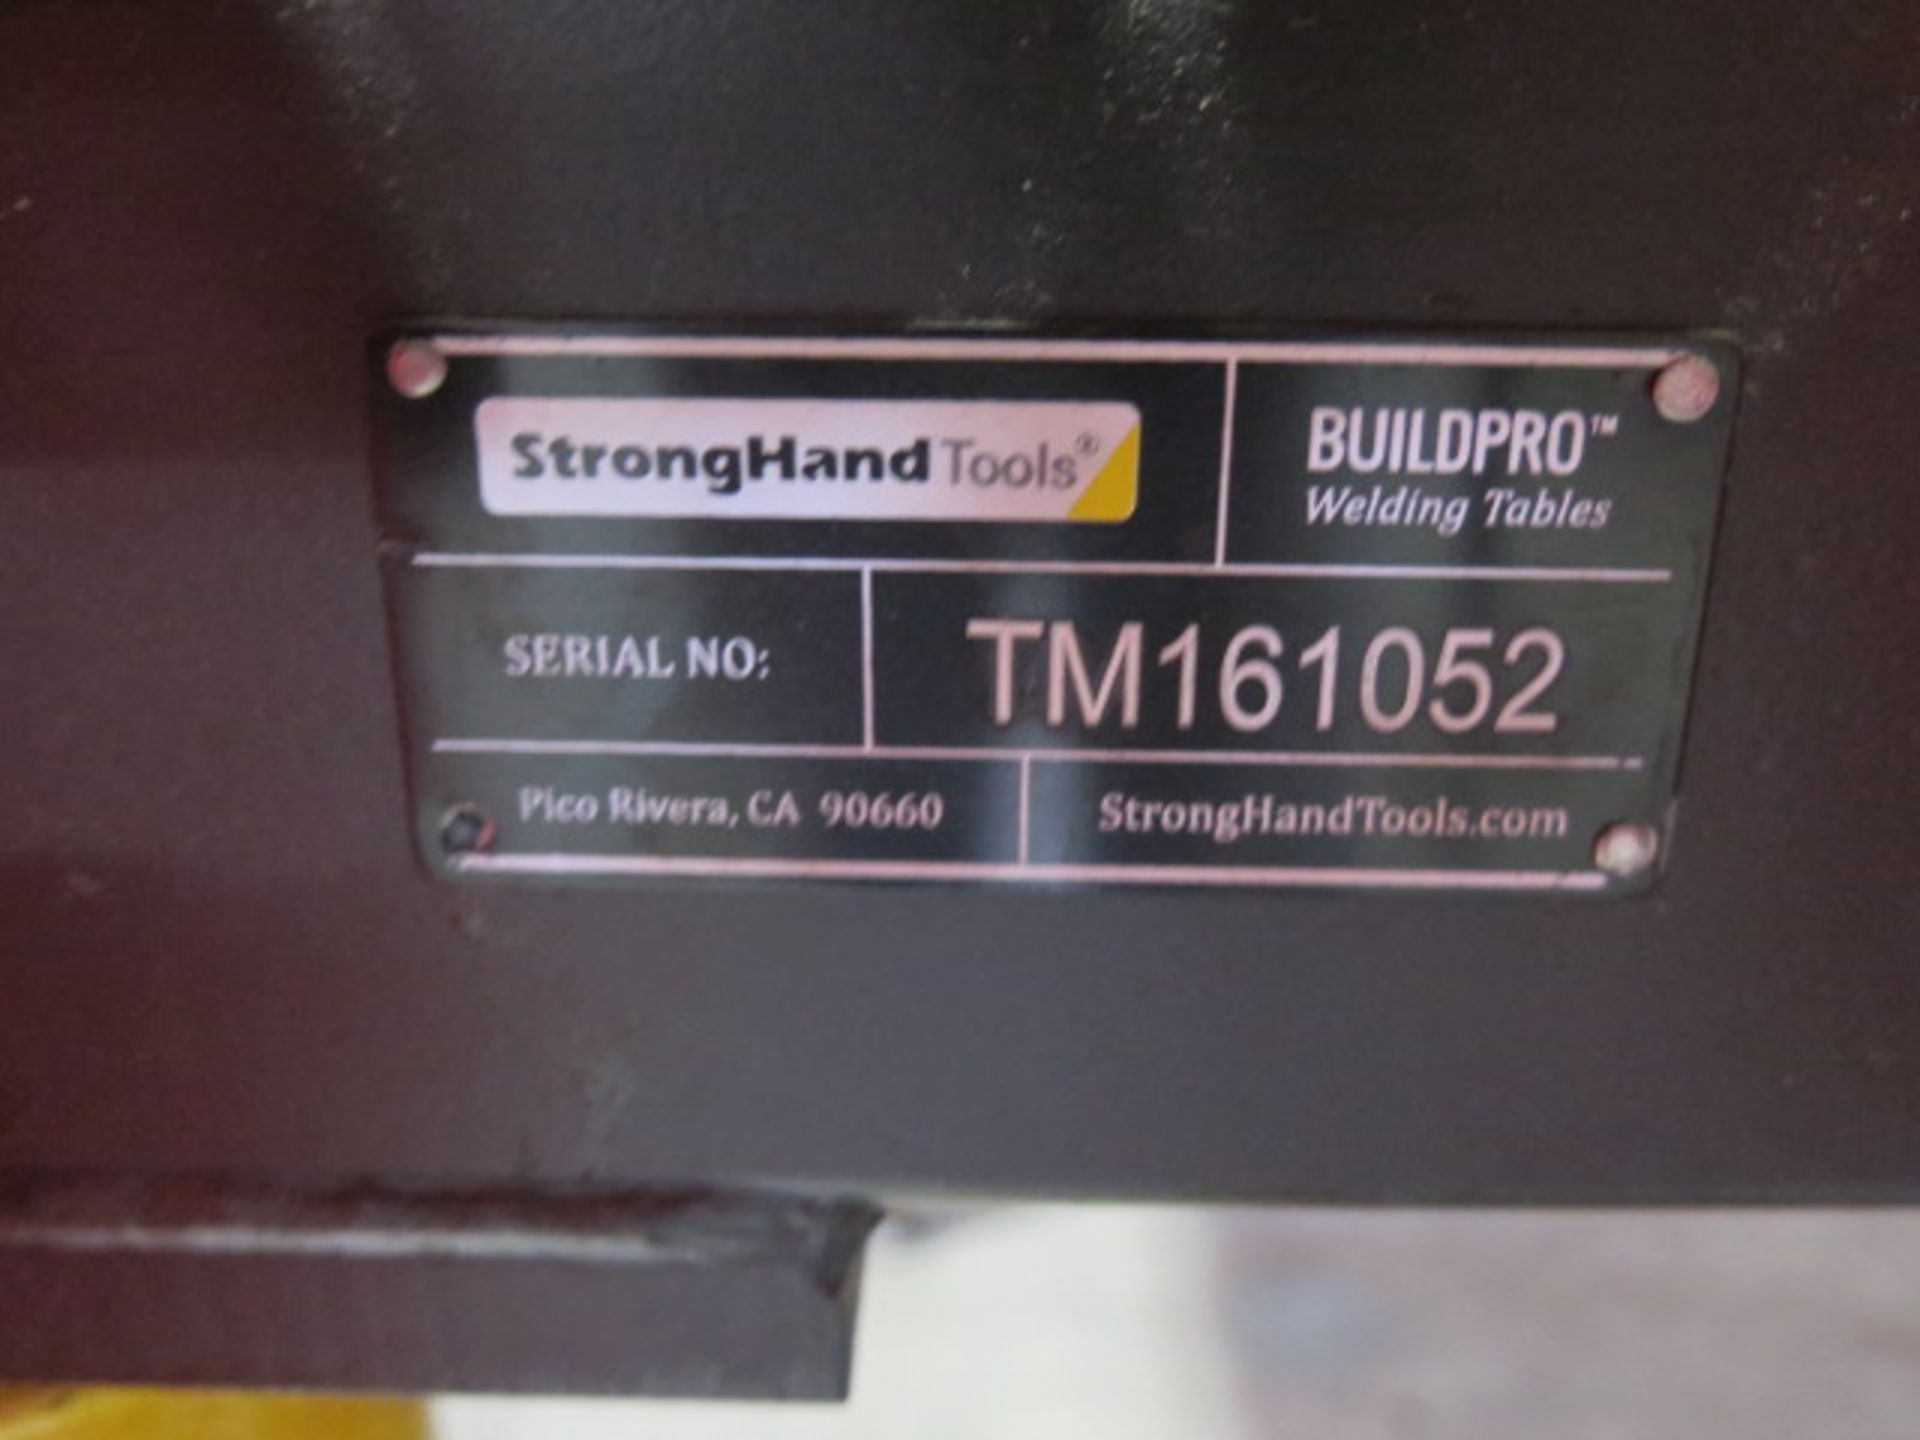 StrongHand Tools Build Pro 48" x 96" Forming Table s/n TM161053 (SOLD AS-IS - NO WARRANTY) - Image 7 of 7